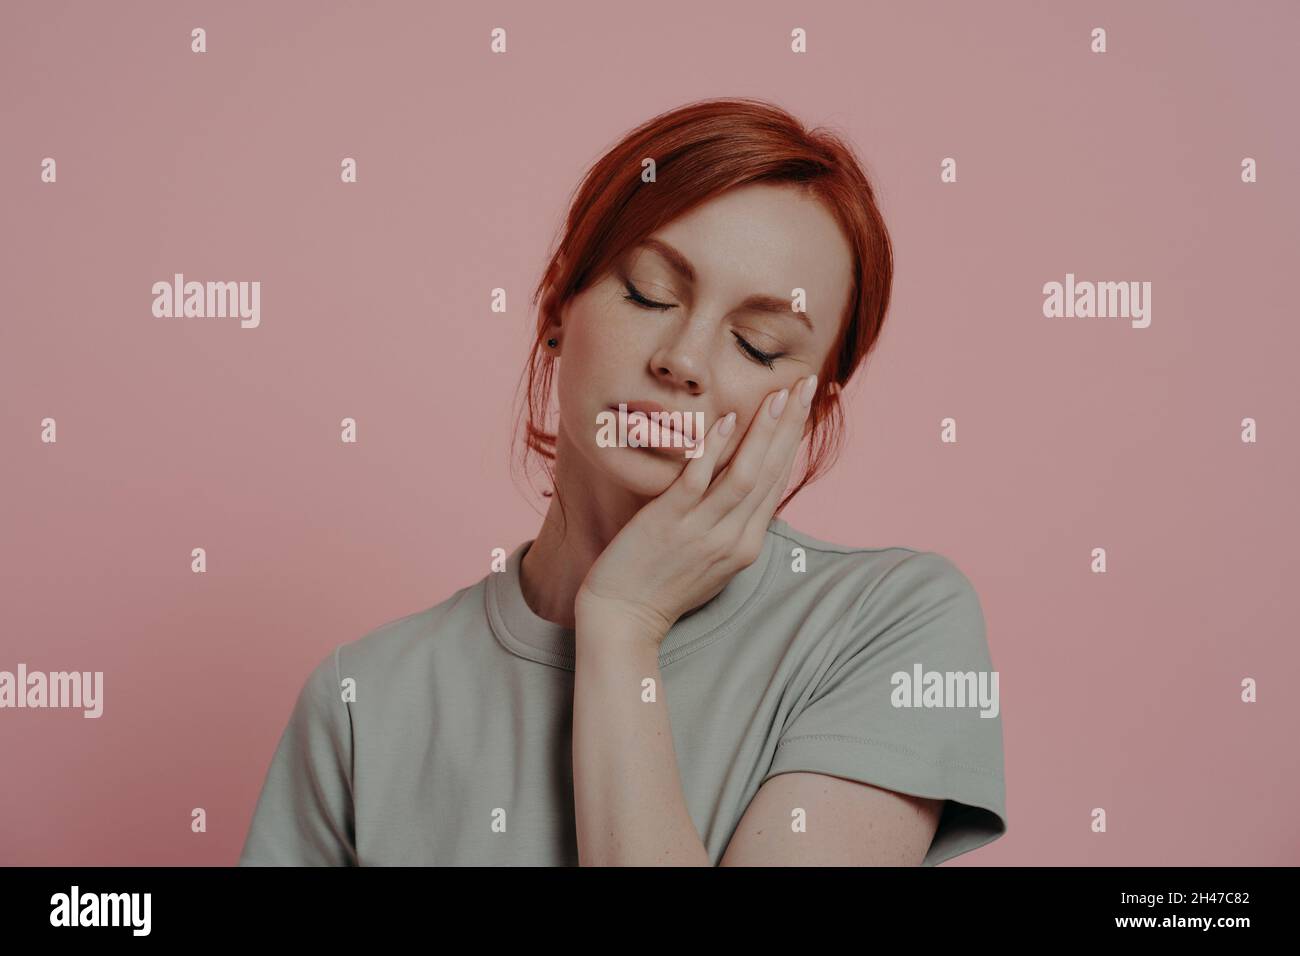 Sleepy tired red-haired woman dozing on hand, falling asleep, isolated over pink background Stock Photo